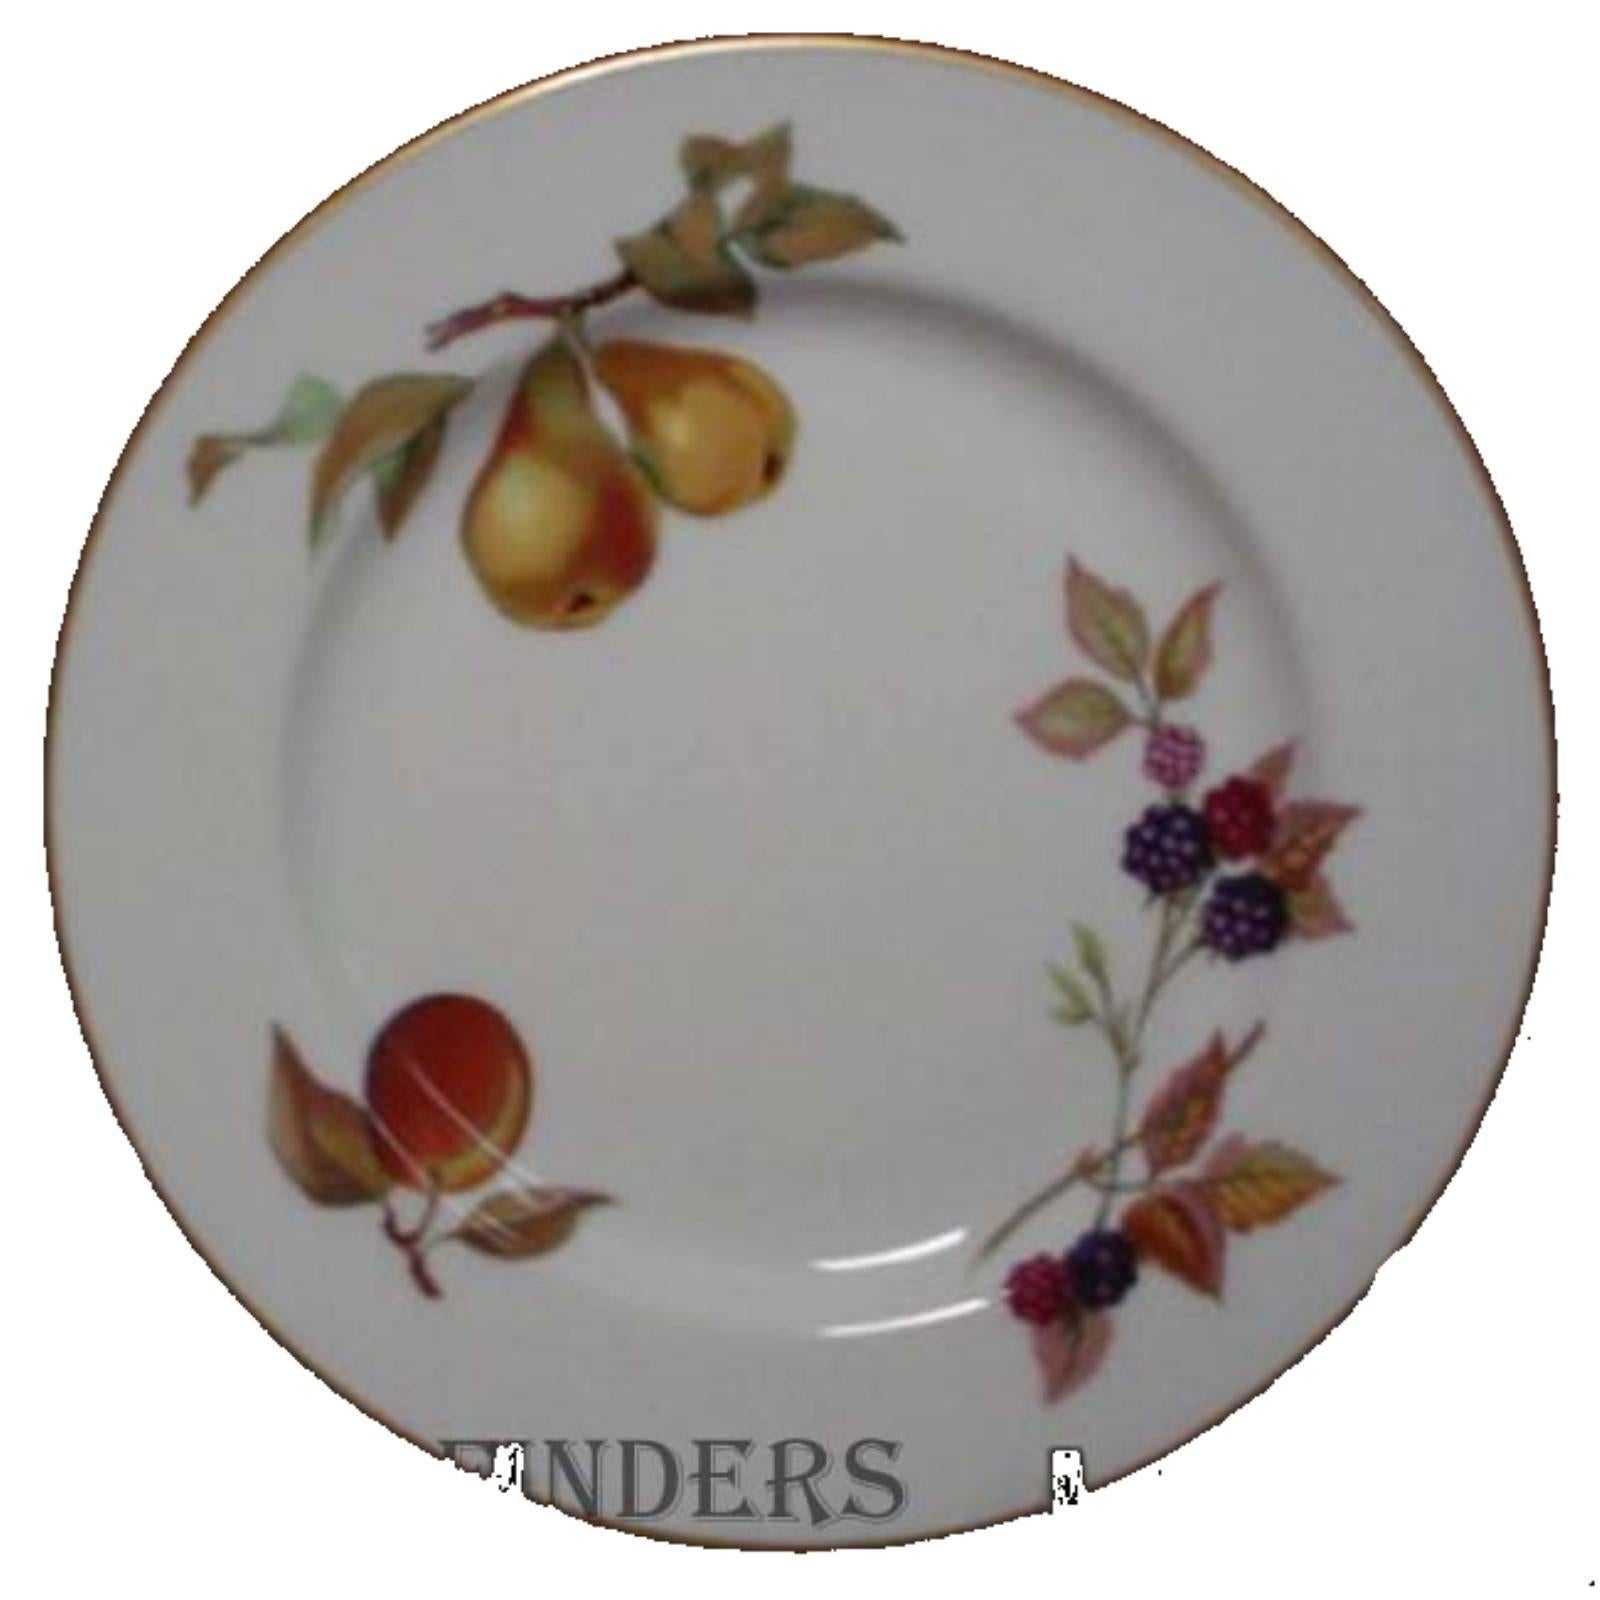 In great condition with occasional use.

Production dates: 1961-2015.

Includes 12 cup, 12 saucer, 12 dinner plate, 12 salad plate, 12 bread plate, 12 fruit/ dessert/ berry bowl and 12 ramekin (no gold on ramekin).

Porcelain.

Various